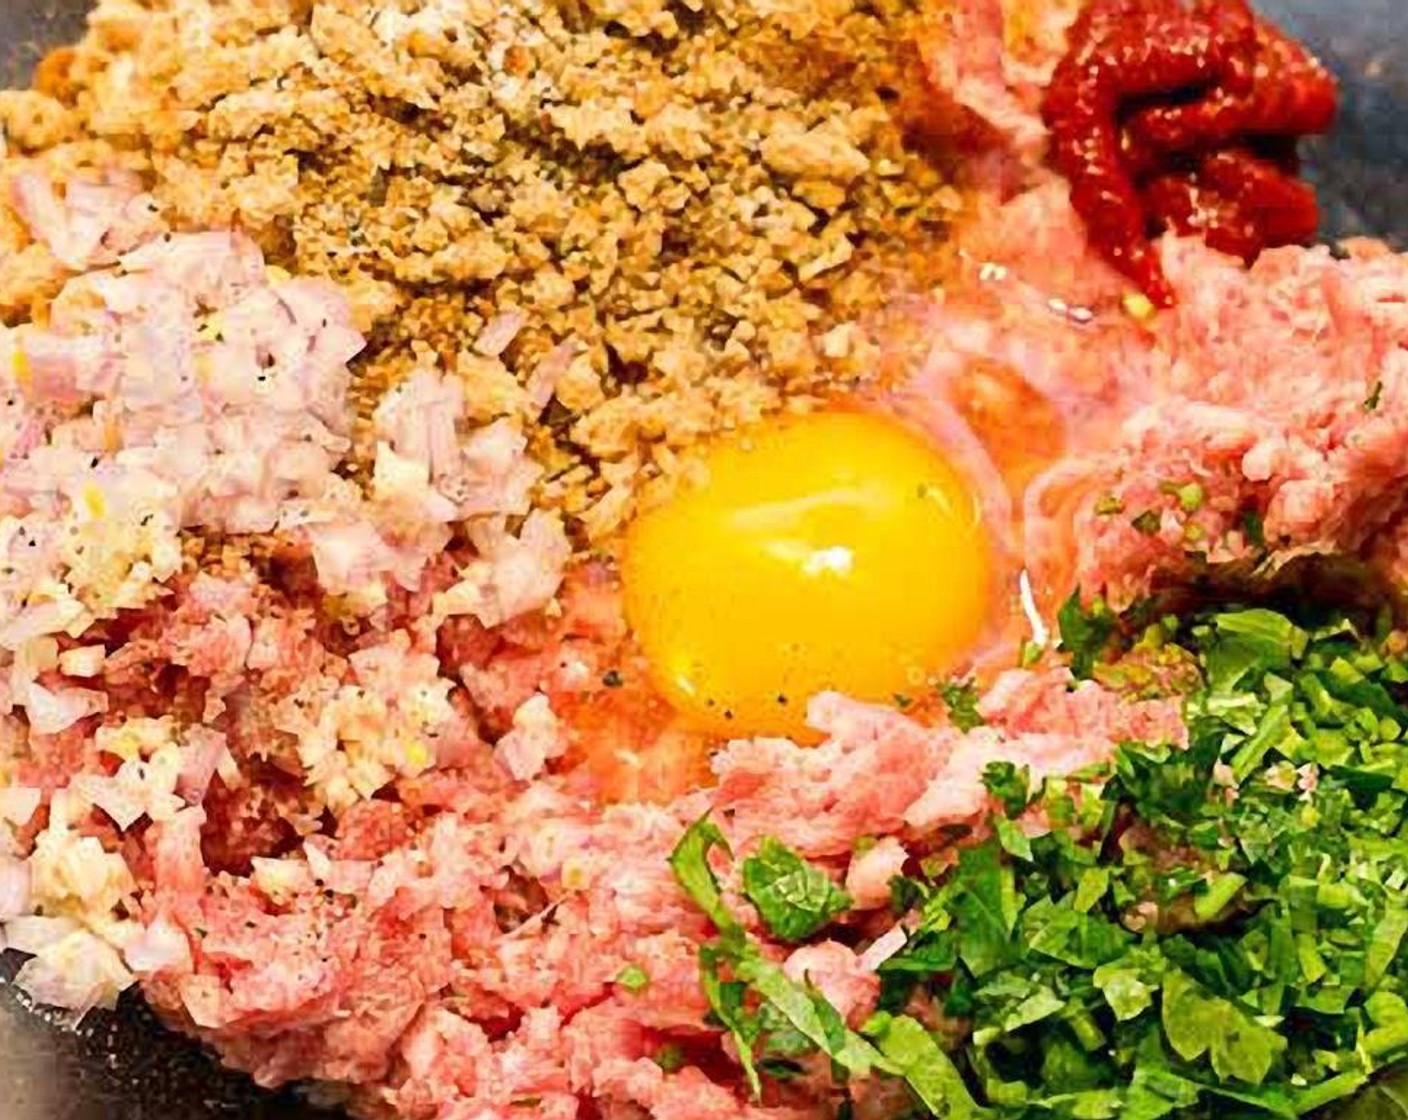 step 2 In a bowl, mix Ground Turkey (1 lb), Egg (1), Breadcrumbs (1/2 cup), Fresh Parsley (1/4 cup), Garlic (1 clove), Shallot (1/4 cup), Tomato Paste (1 Tbsp), Salt (1 tsp) and Ground Black Pepper (1 tsp) together thoroughly with your hands.